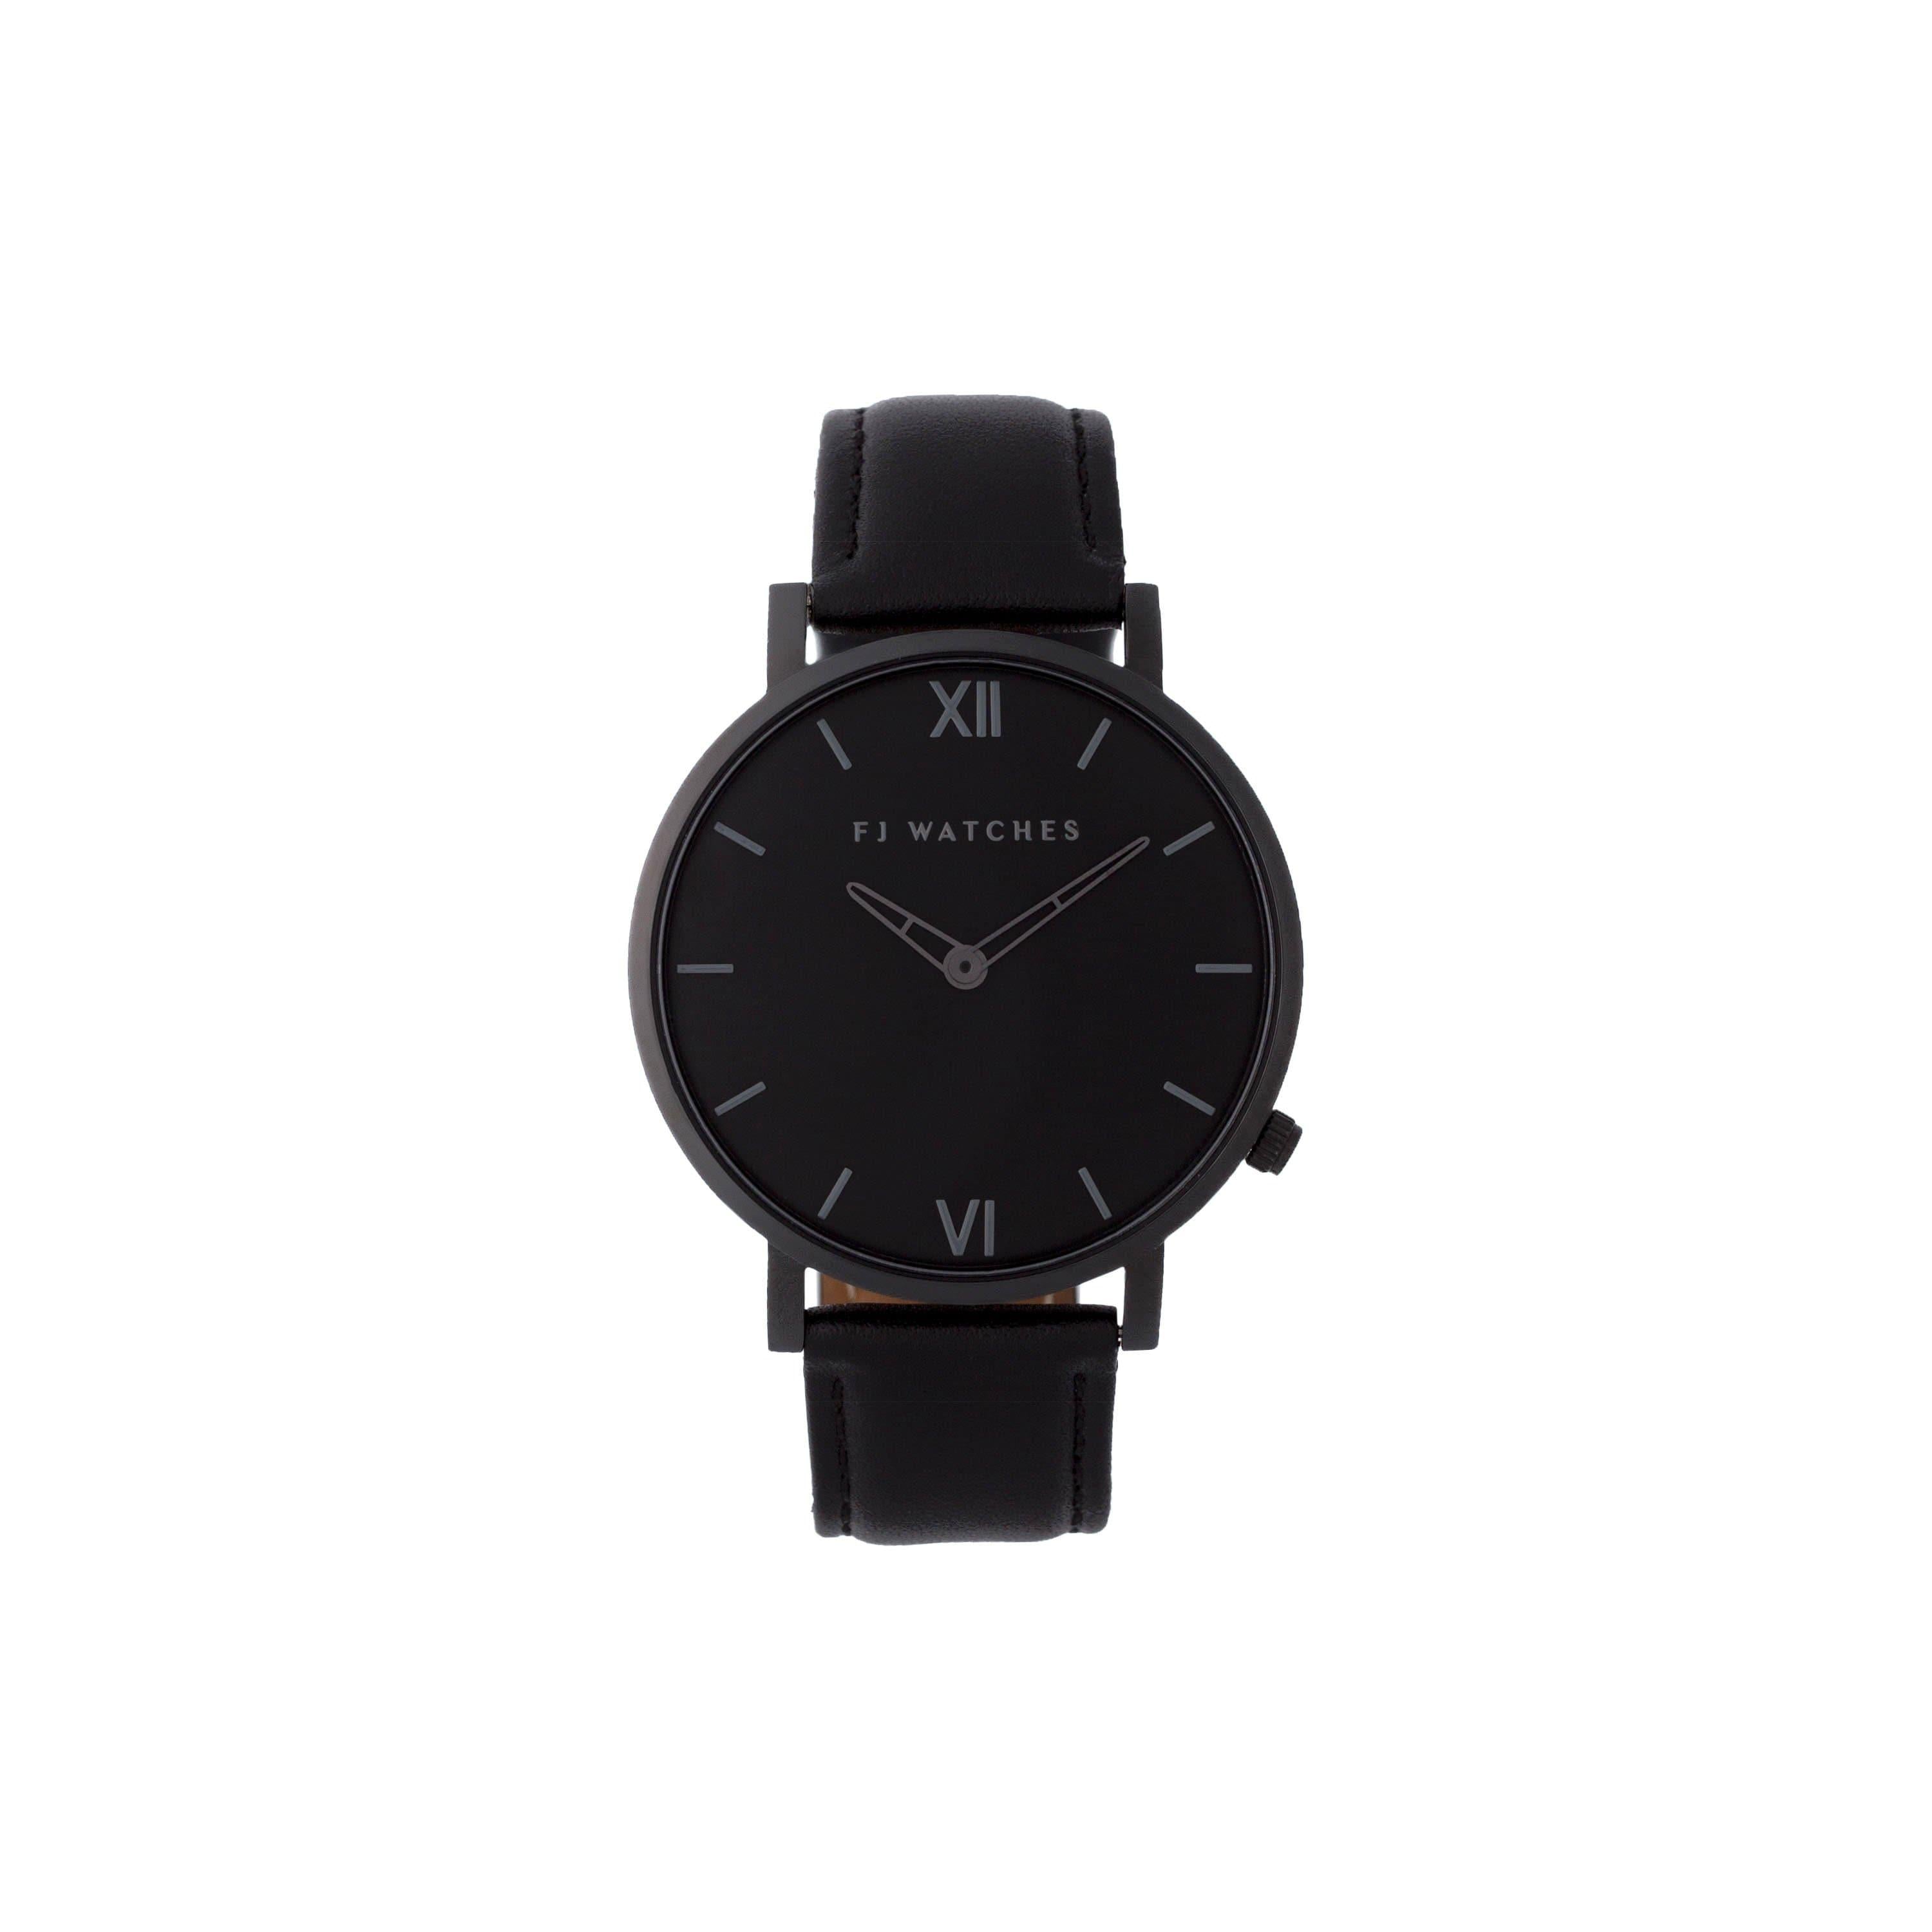 FJ Watches Dark moon all black watch for women 36mm with leather strap minimalist